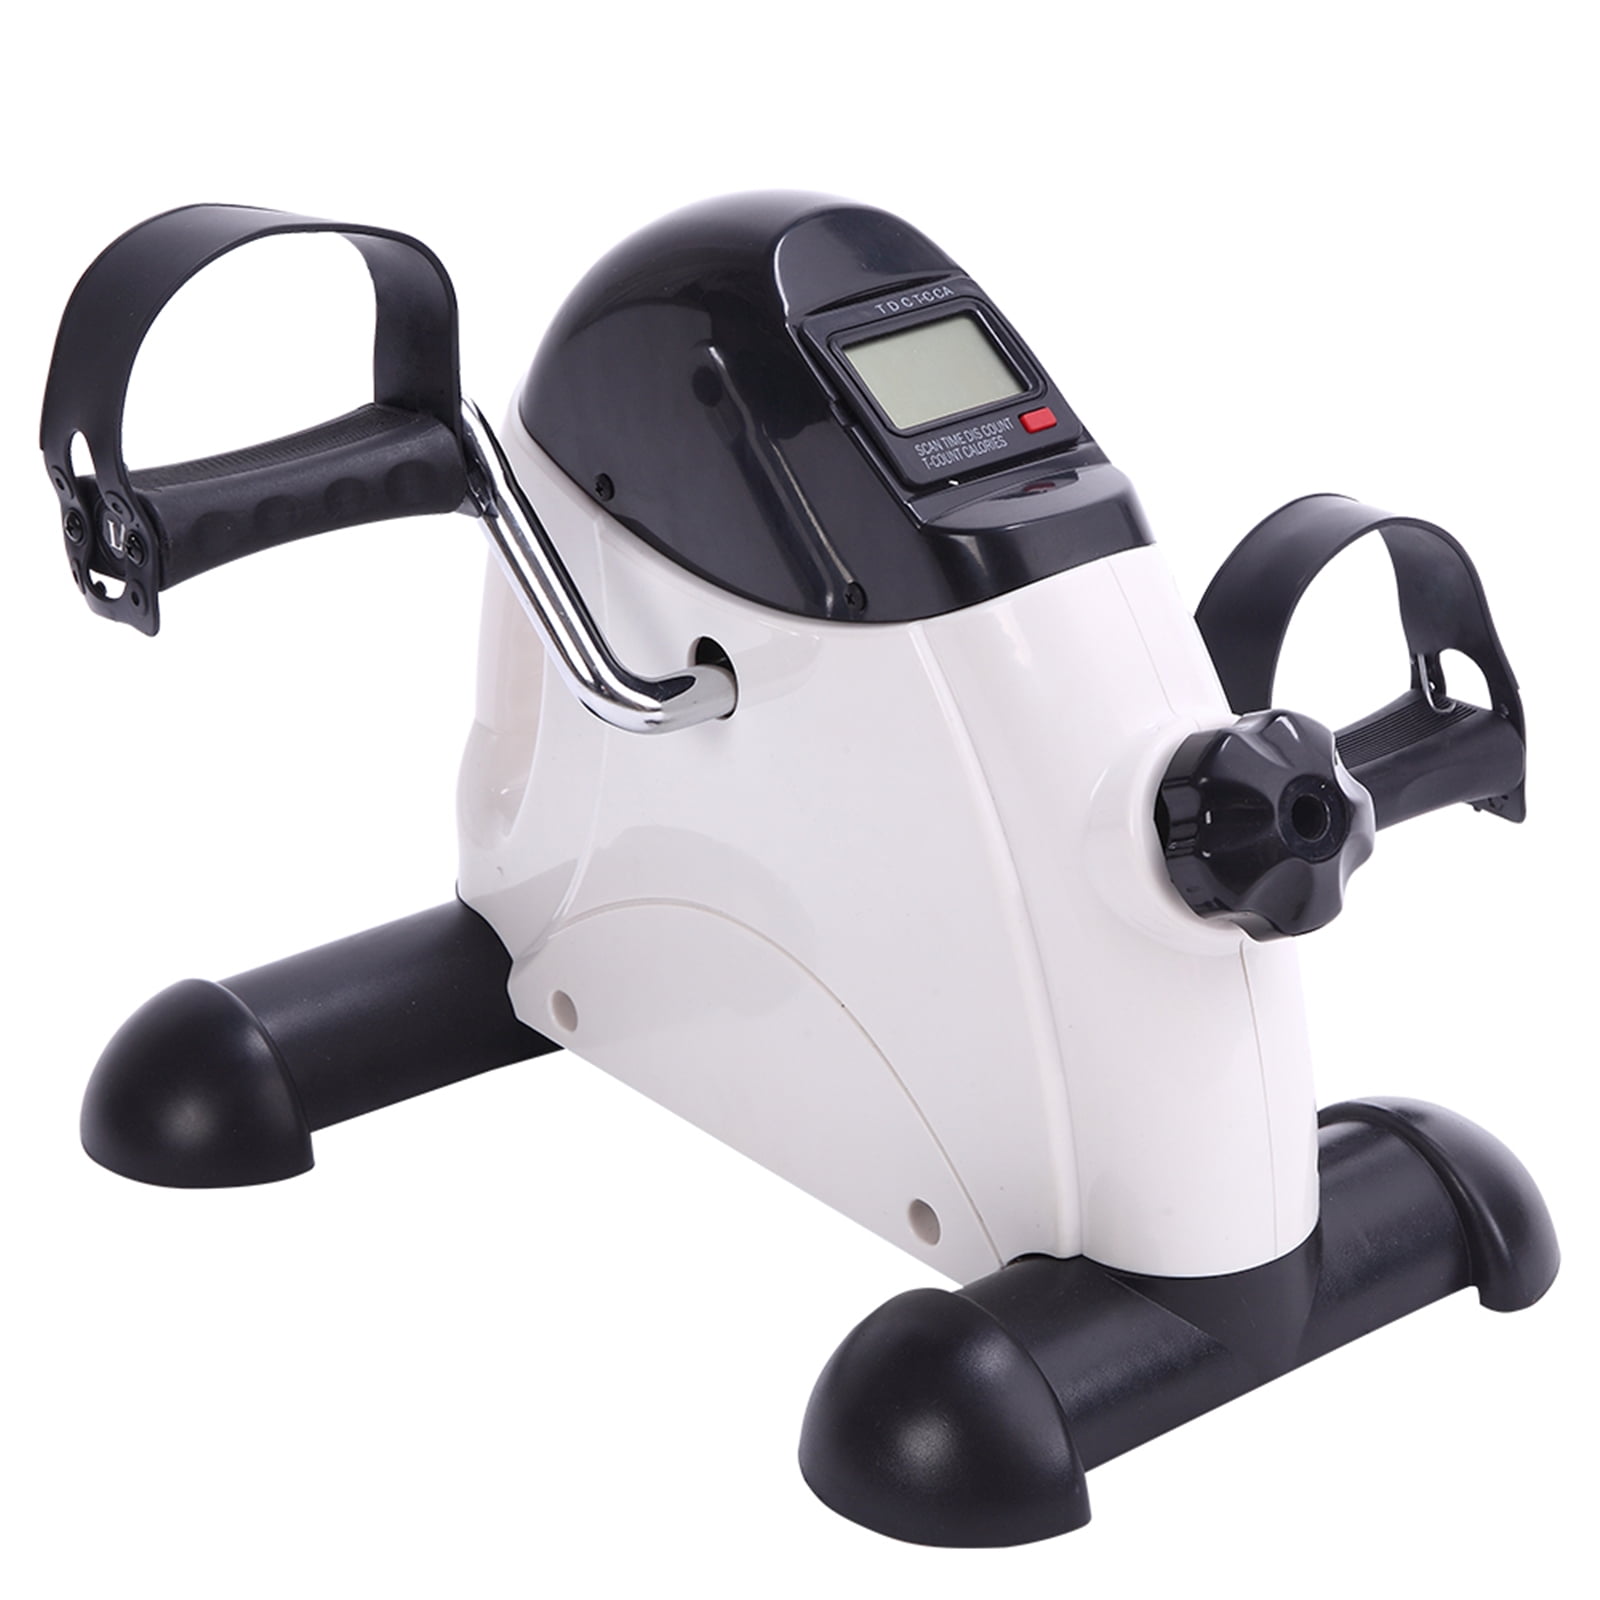 Portable Home Use Hands and Feet Trainer Mini Exercise Bike White & Black 